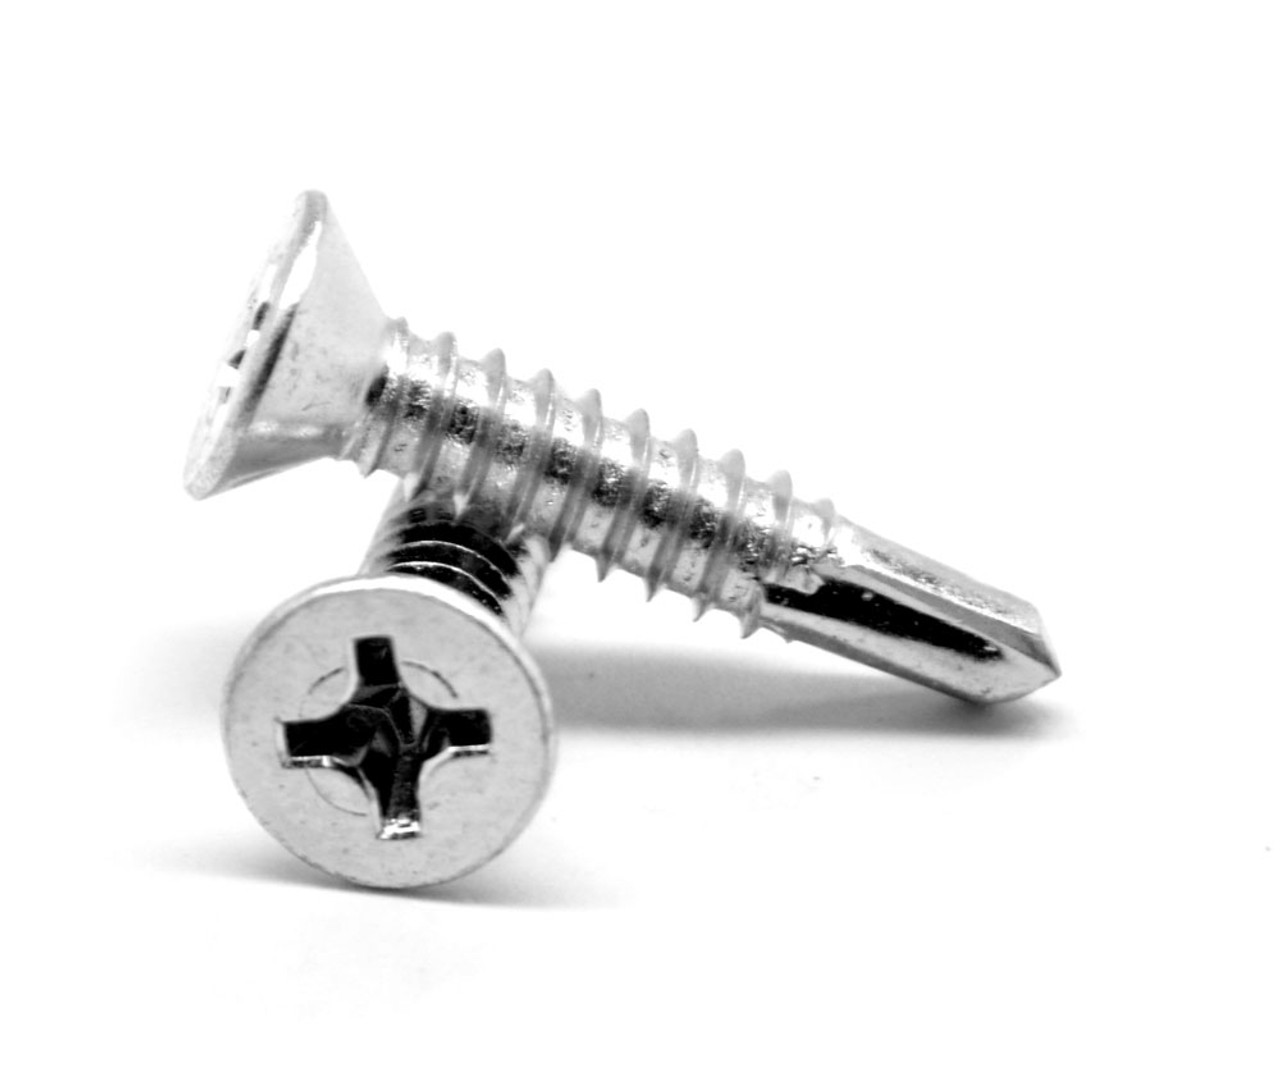 #12-14 x 7/8" (FT) Self Drilling Screws Phillips Flat Head #3 Point Stainless Steel 410